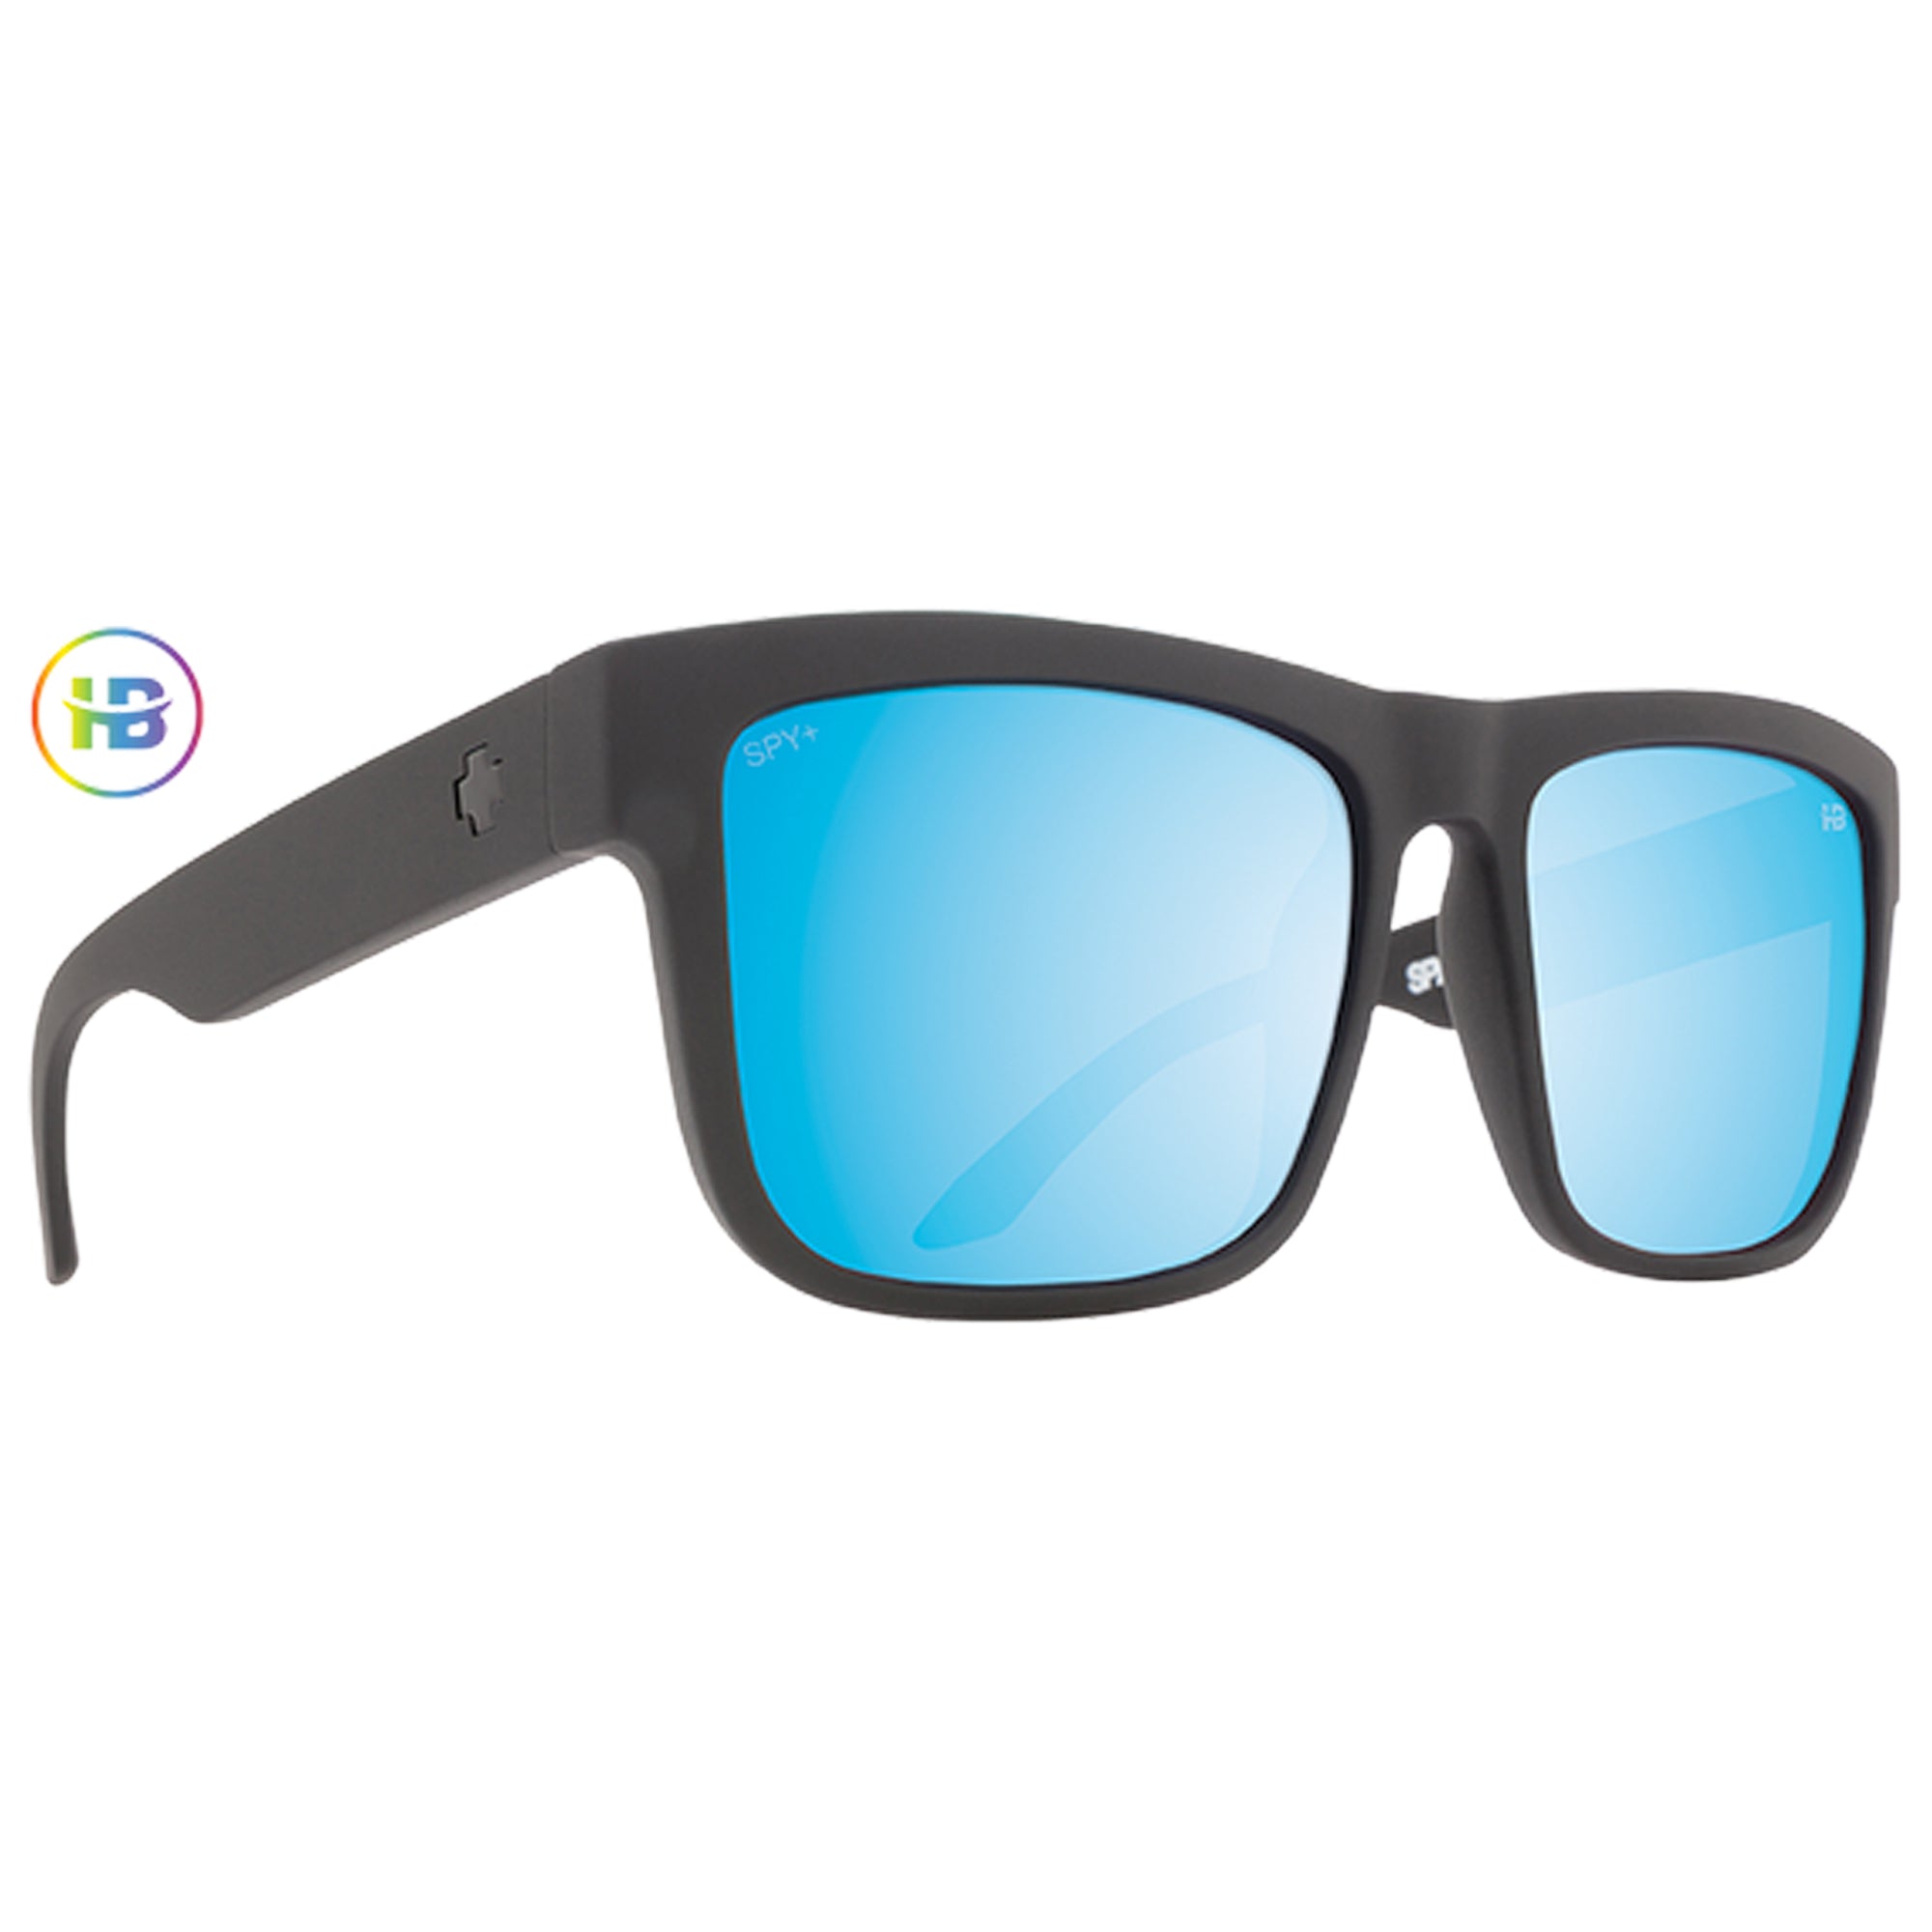 Buy Rear View Spy Sunglasses Online at Low Prices in India - Amazon.in